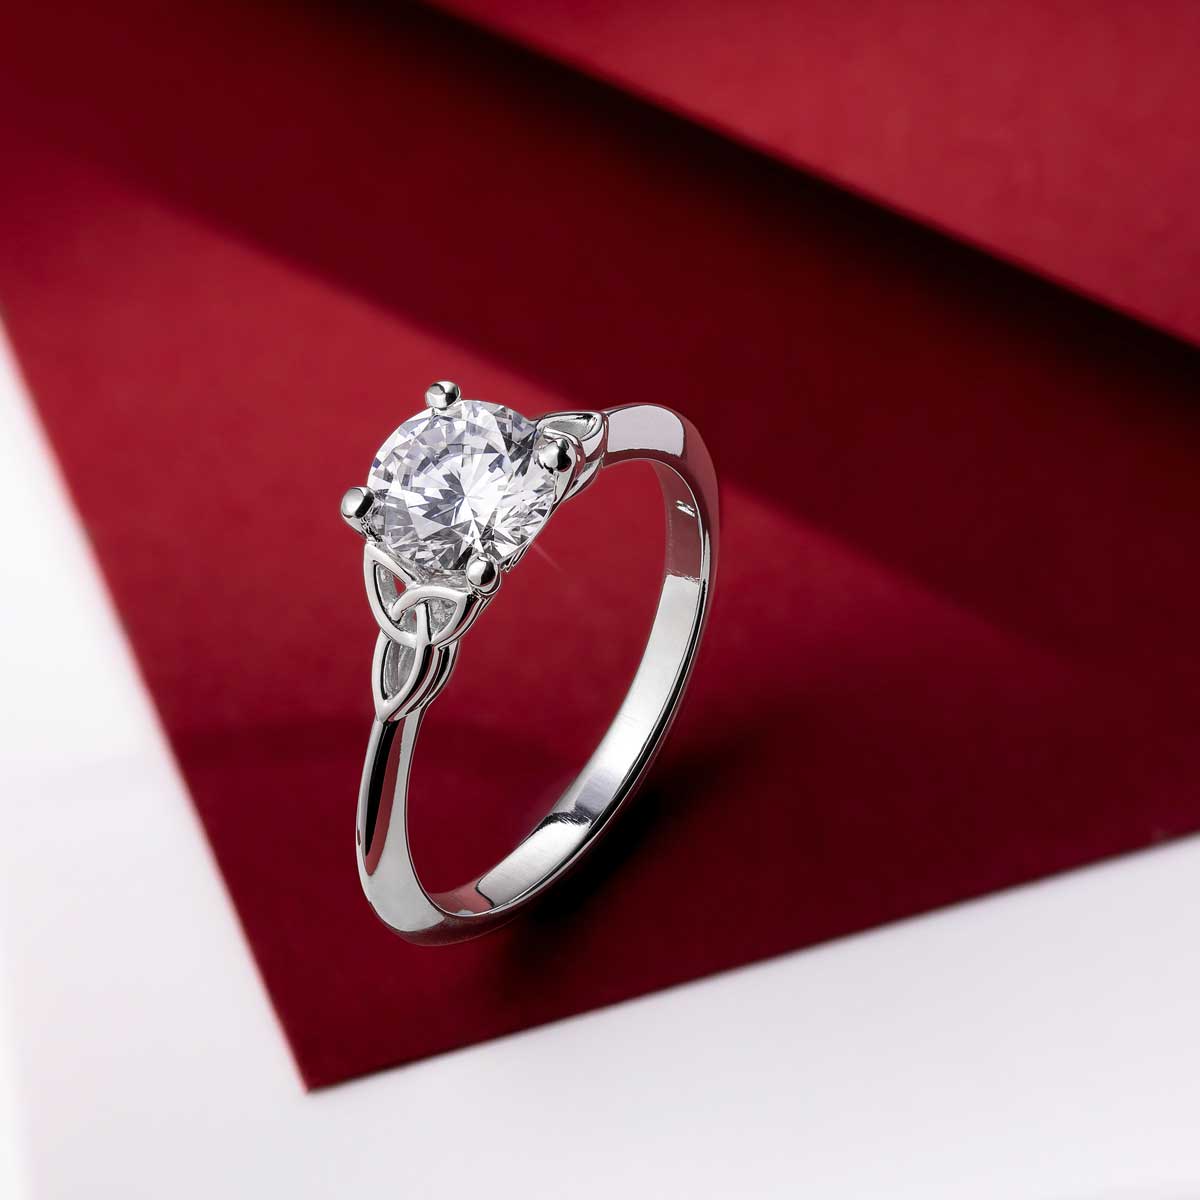 Product image for Irish Engagement Ring | Fiadh 14K White Gold 1ct Diamond Solitaire Celtic Trinity Knot Ring 